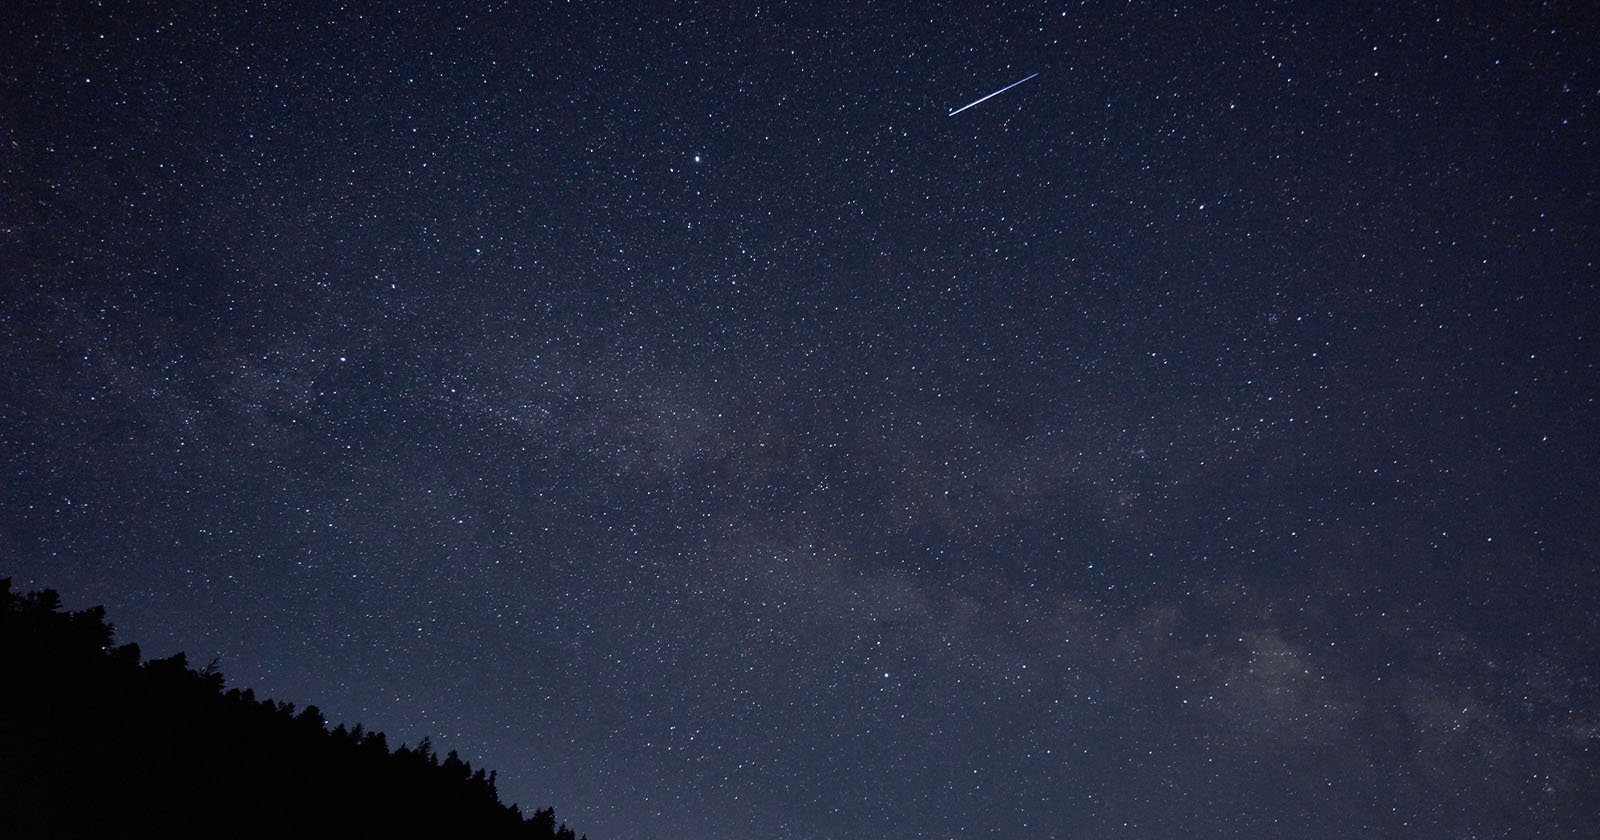 The Meteors, Asteroids, and Planets You Can Photograph in December